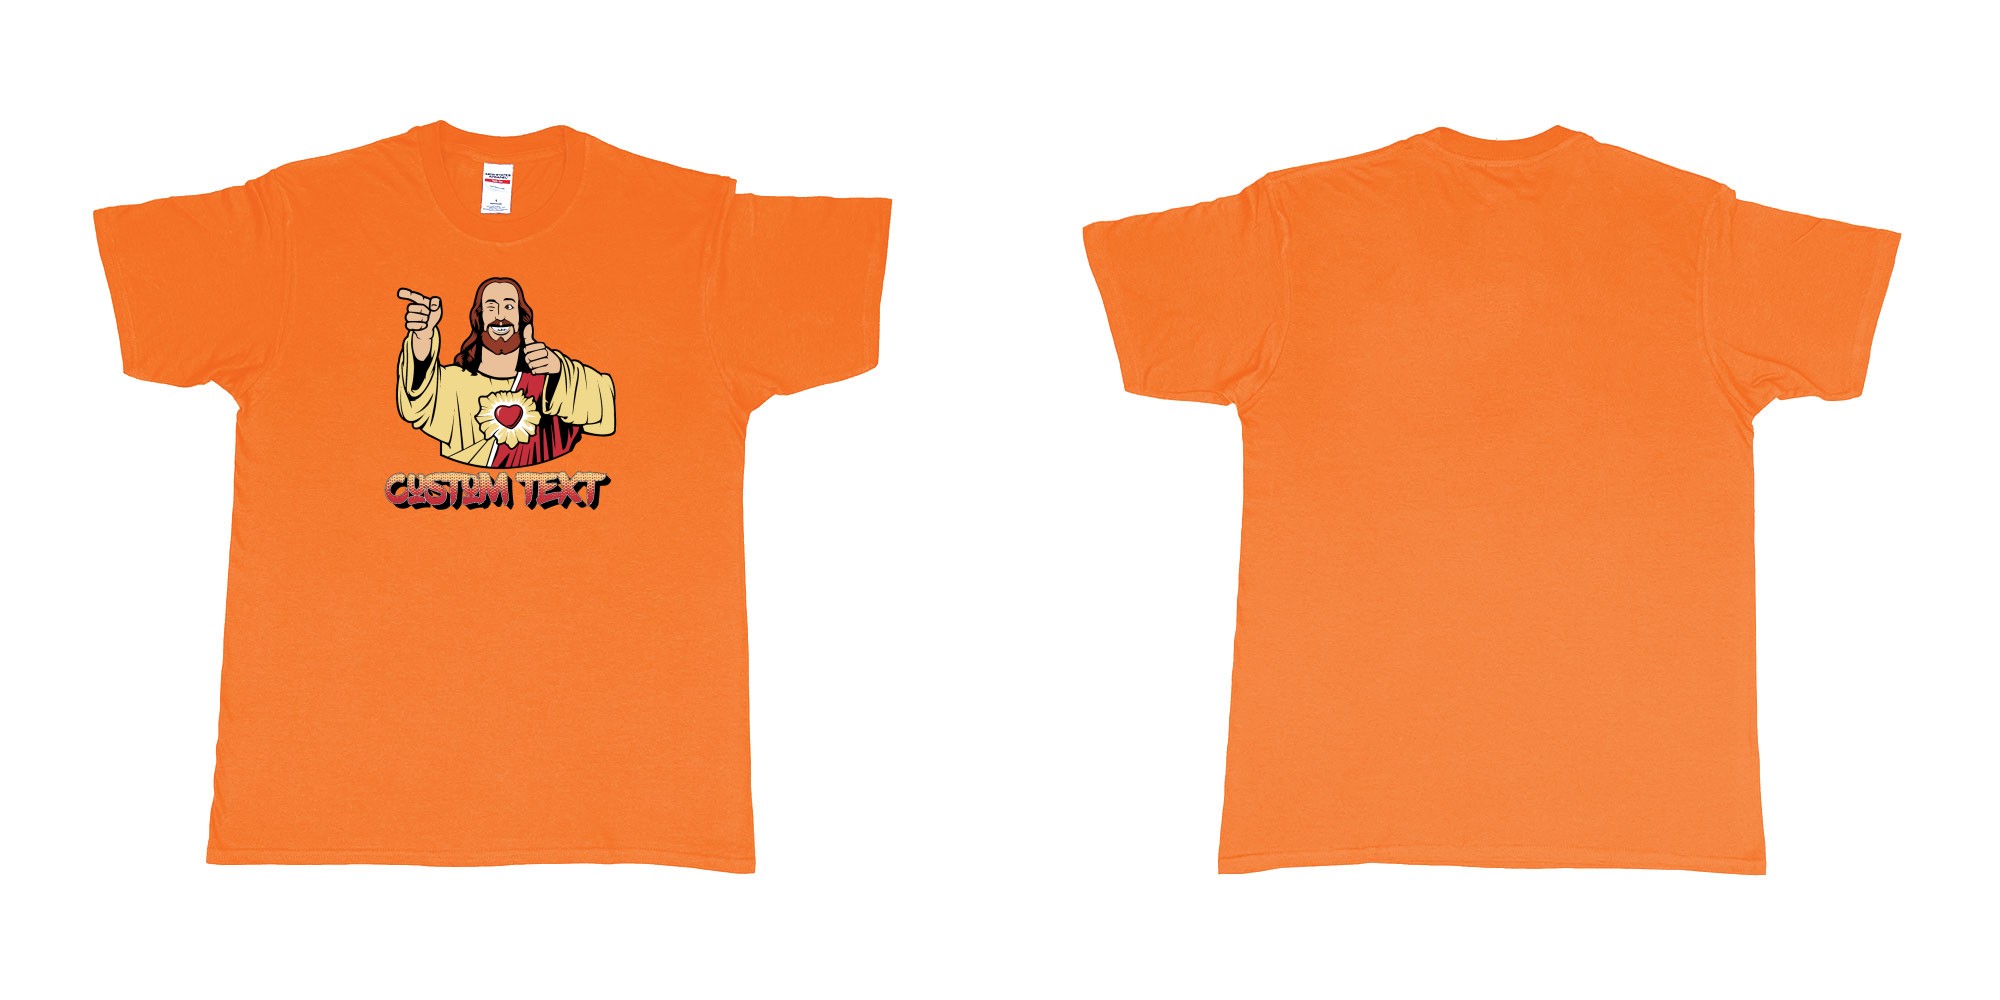 Custom tshirt design buddy christ custom text in fabric color orange choice your own text made in Bali by The Pirate Way